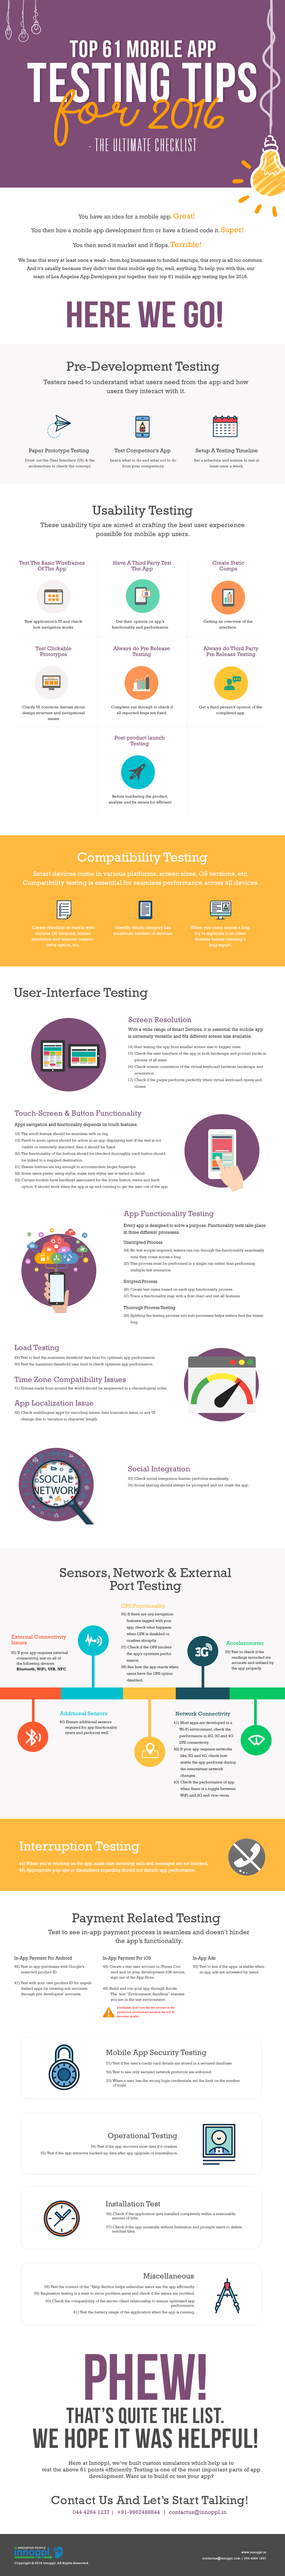 top 61 mobile app testing tips for 2016 the ultimate checklist